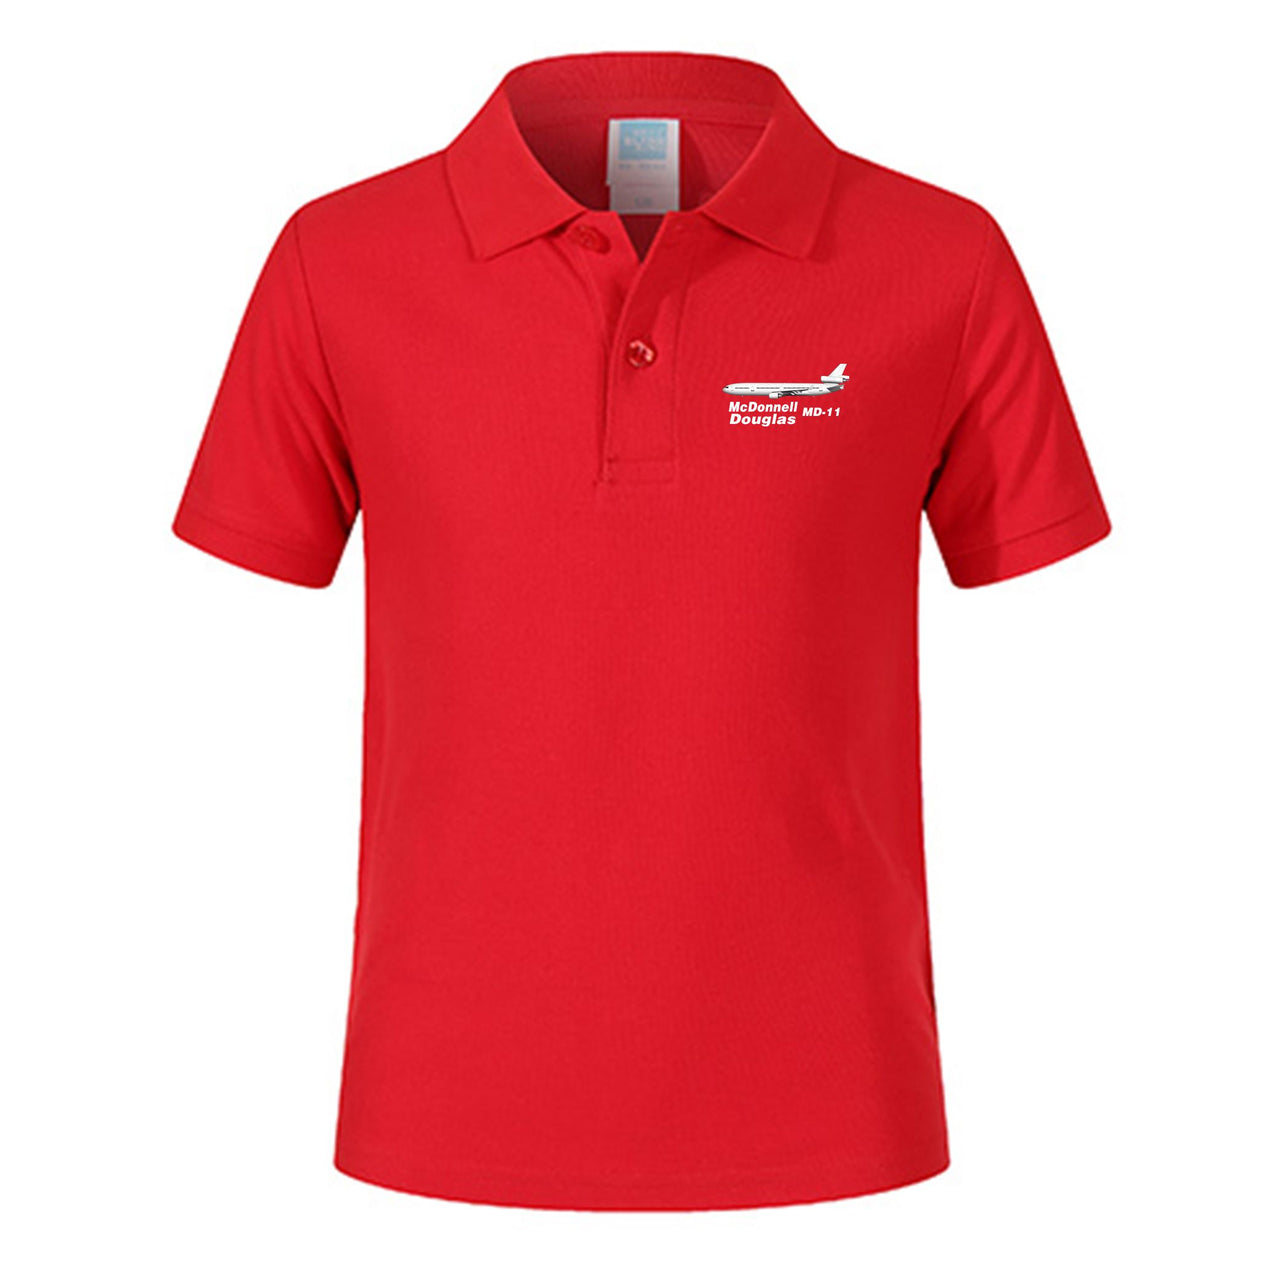 The McDonnell Douglas MD-11 Designed Children Polo T-Shirts